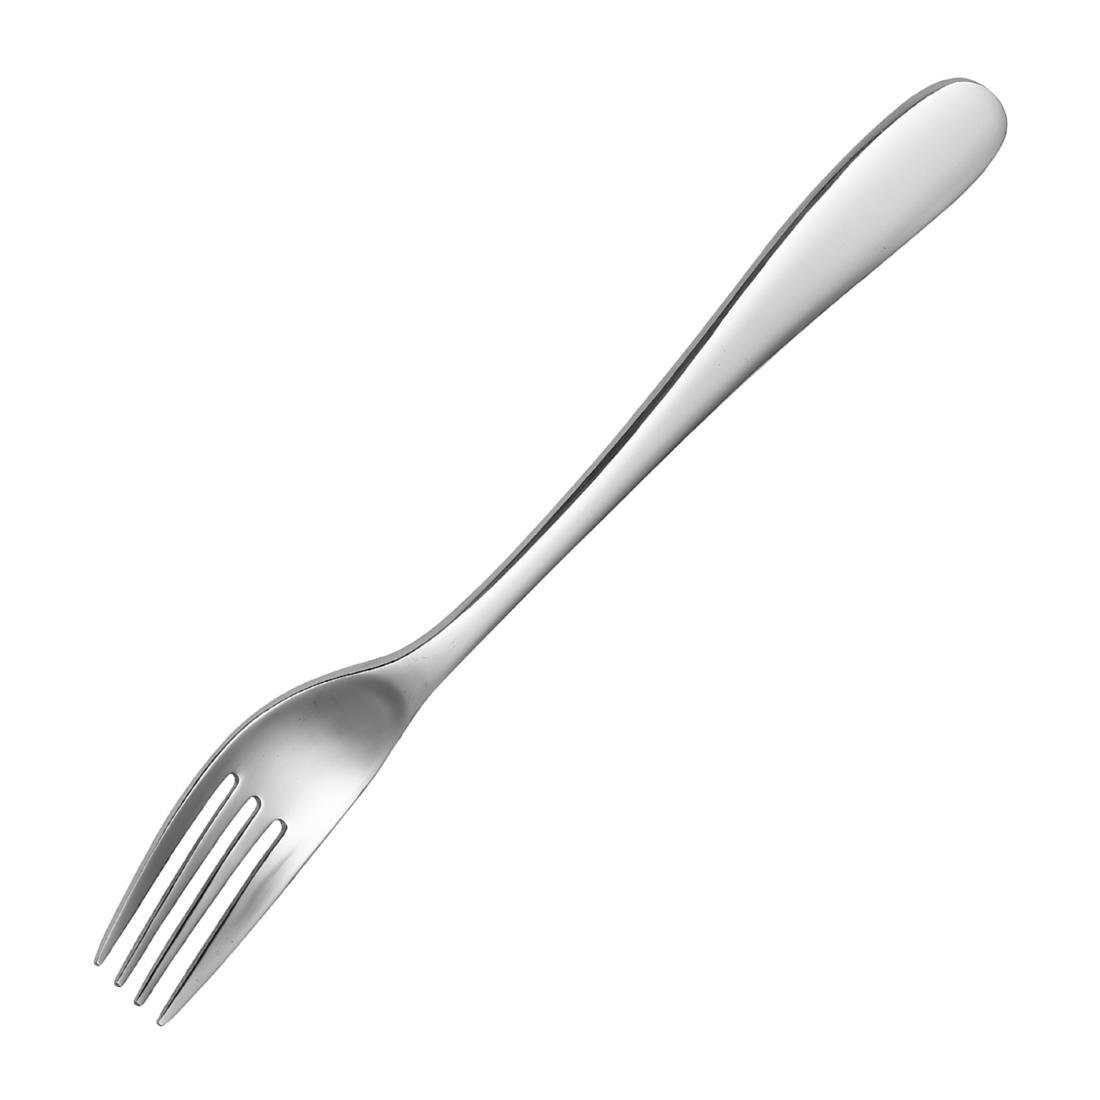 Sola Oasis Cake Fork Silver 18/10 Stainless Steel 3mm, Length 150mm - Pack of 12